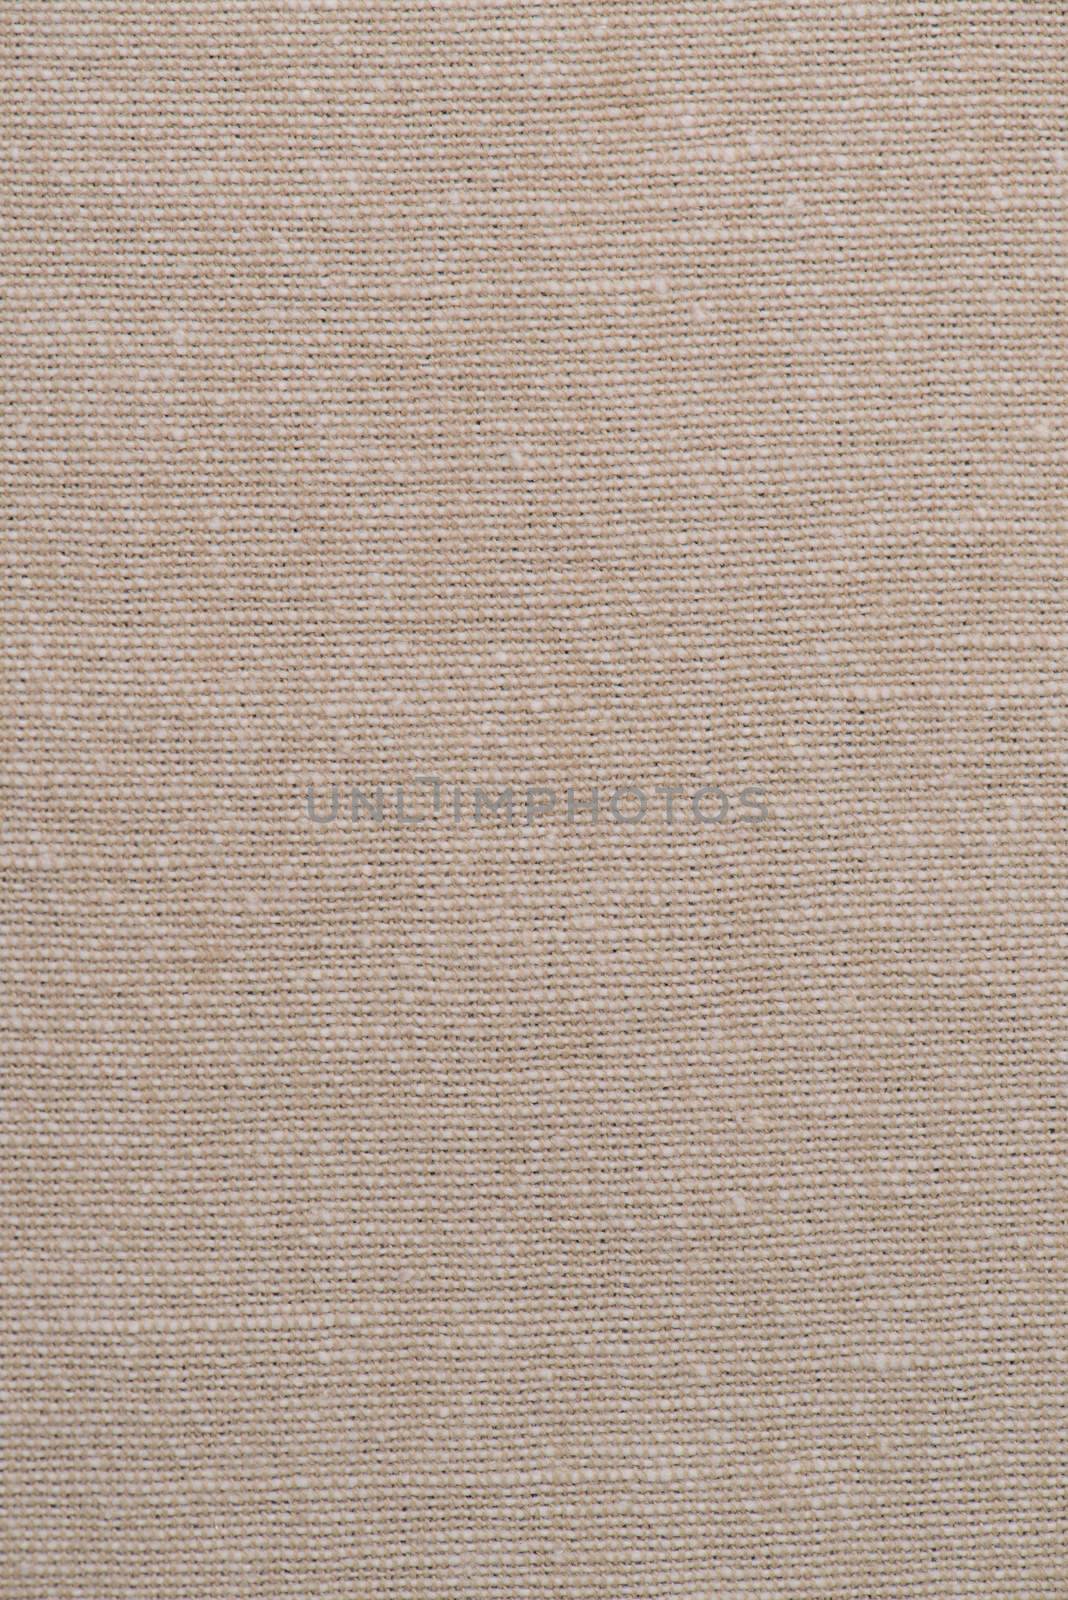 Closeup of brown fabric texture for background